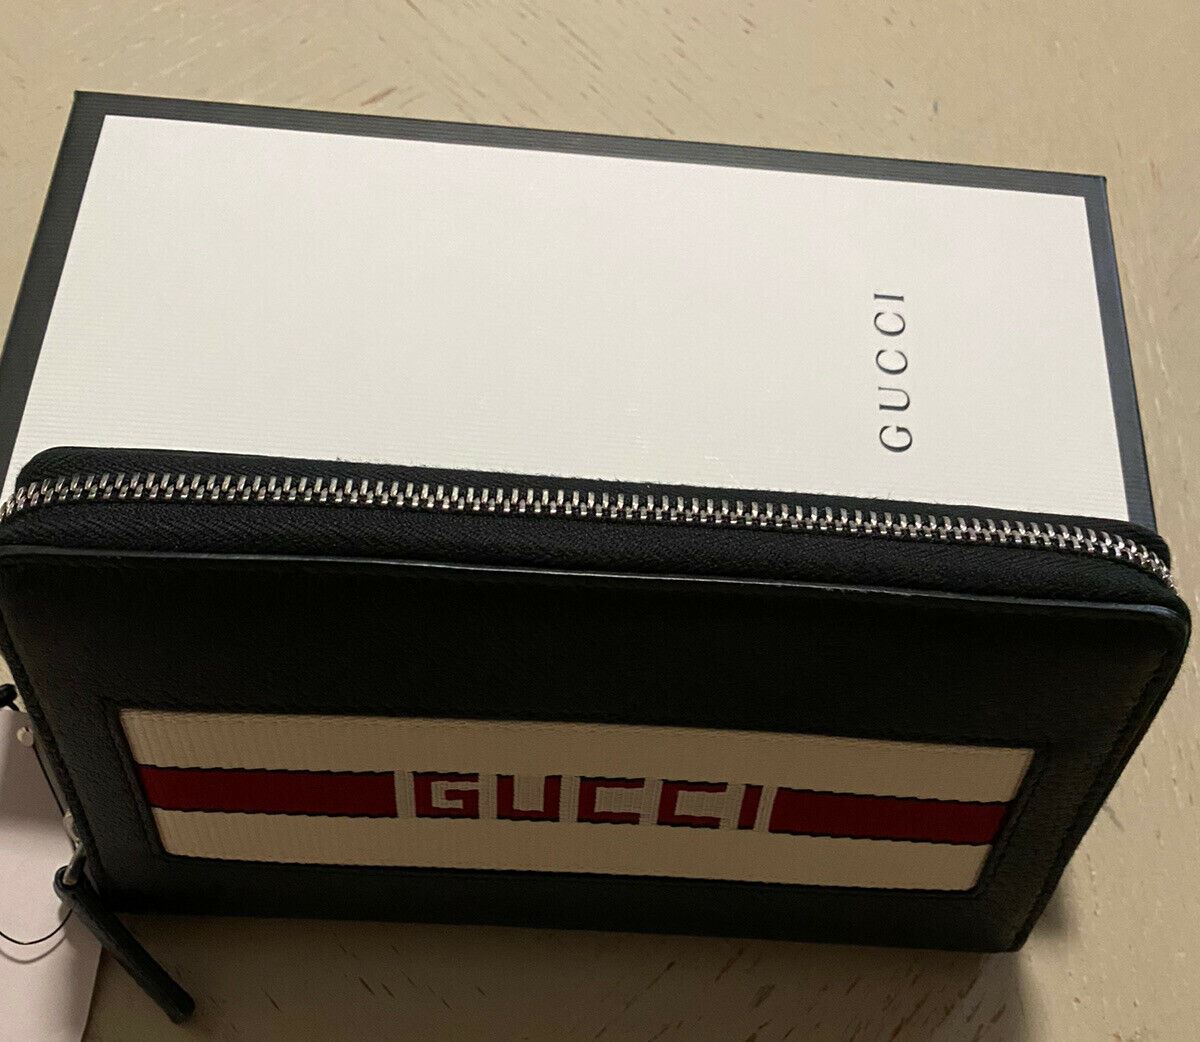 New $870 Gucci Large Wallet Gucci Monogram Black 408831 Italy